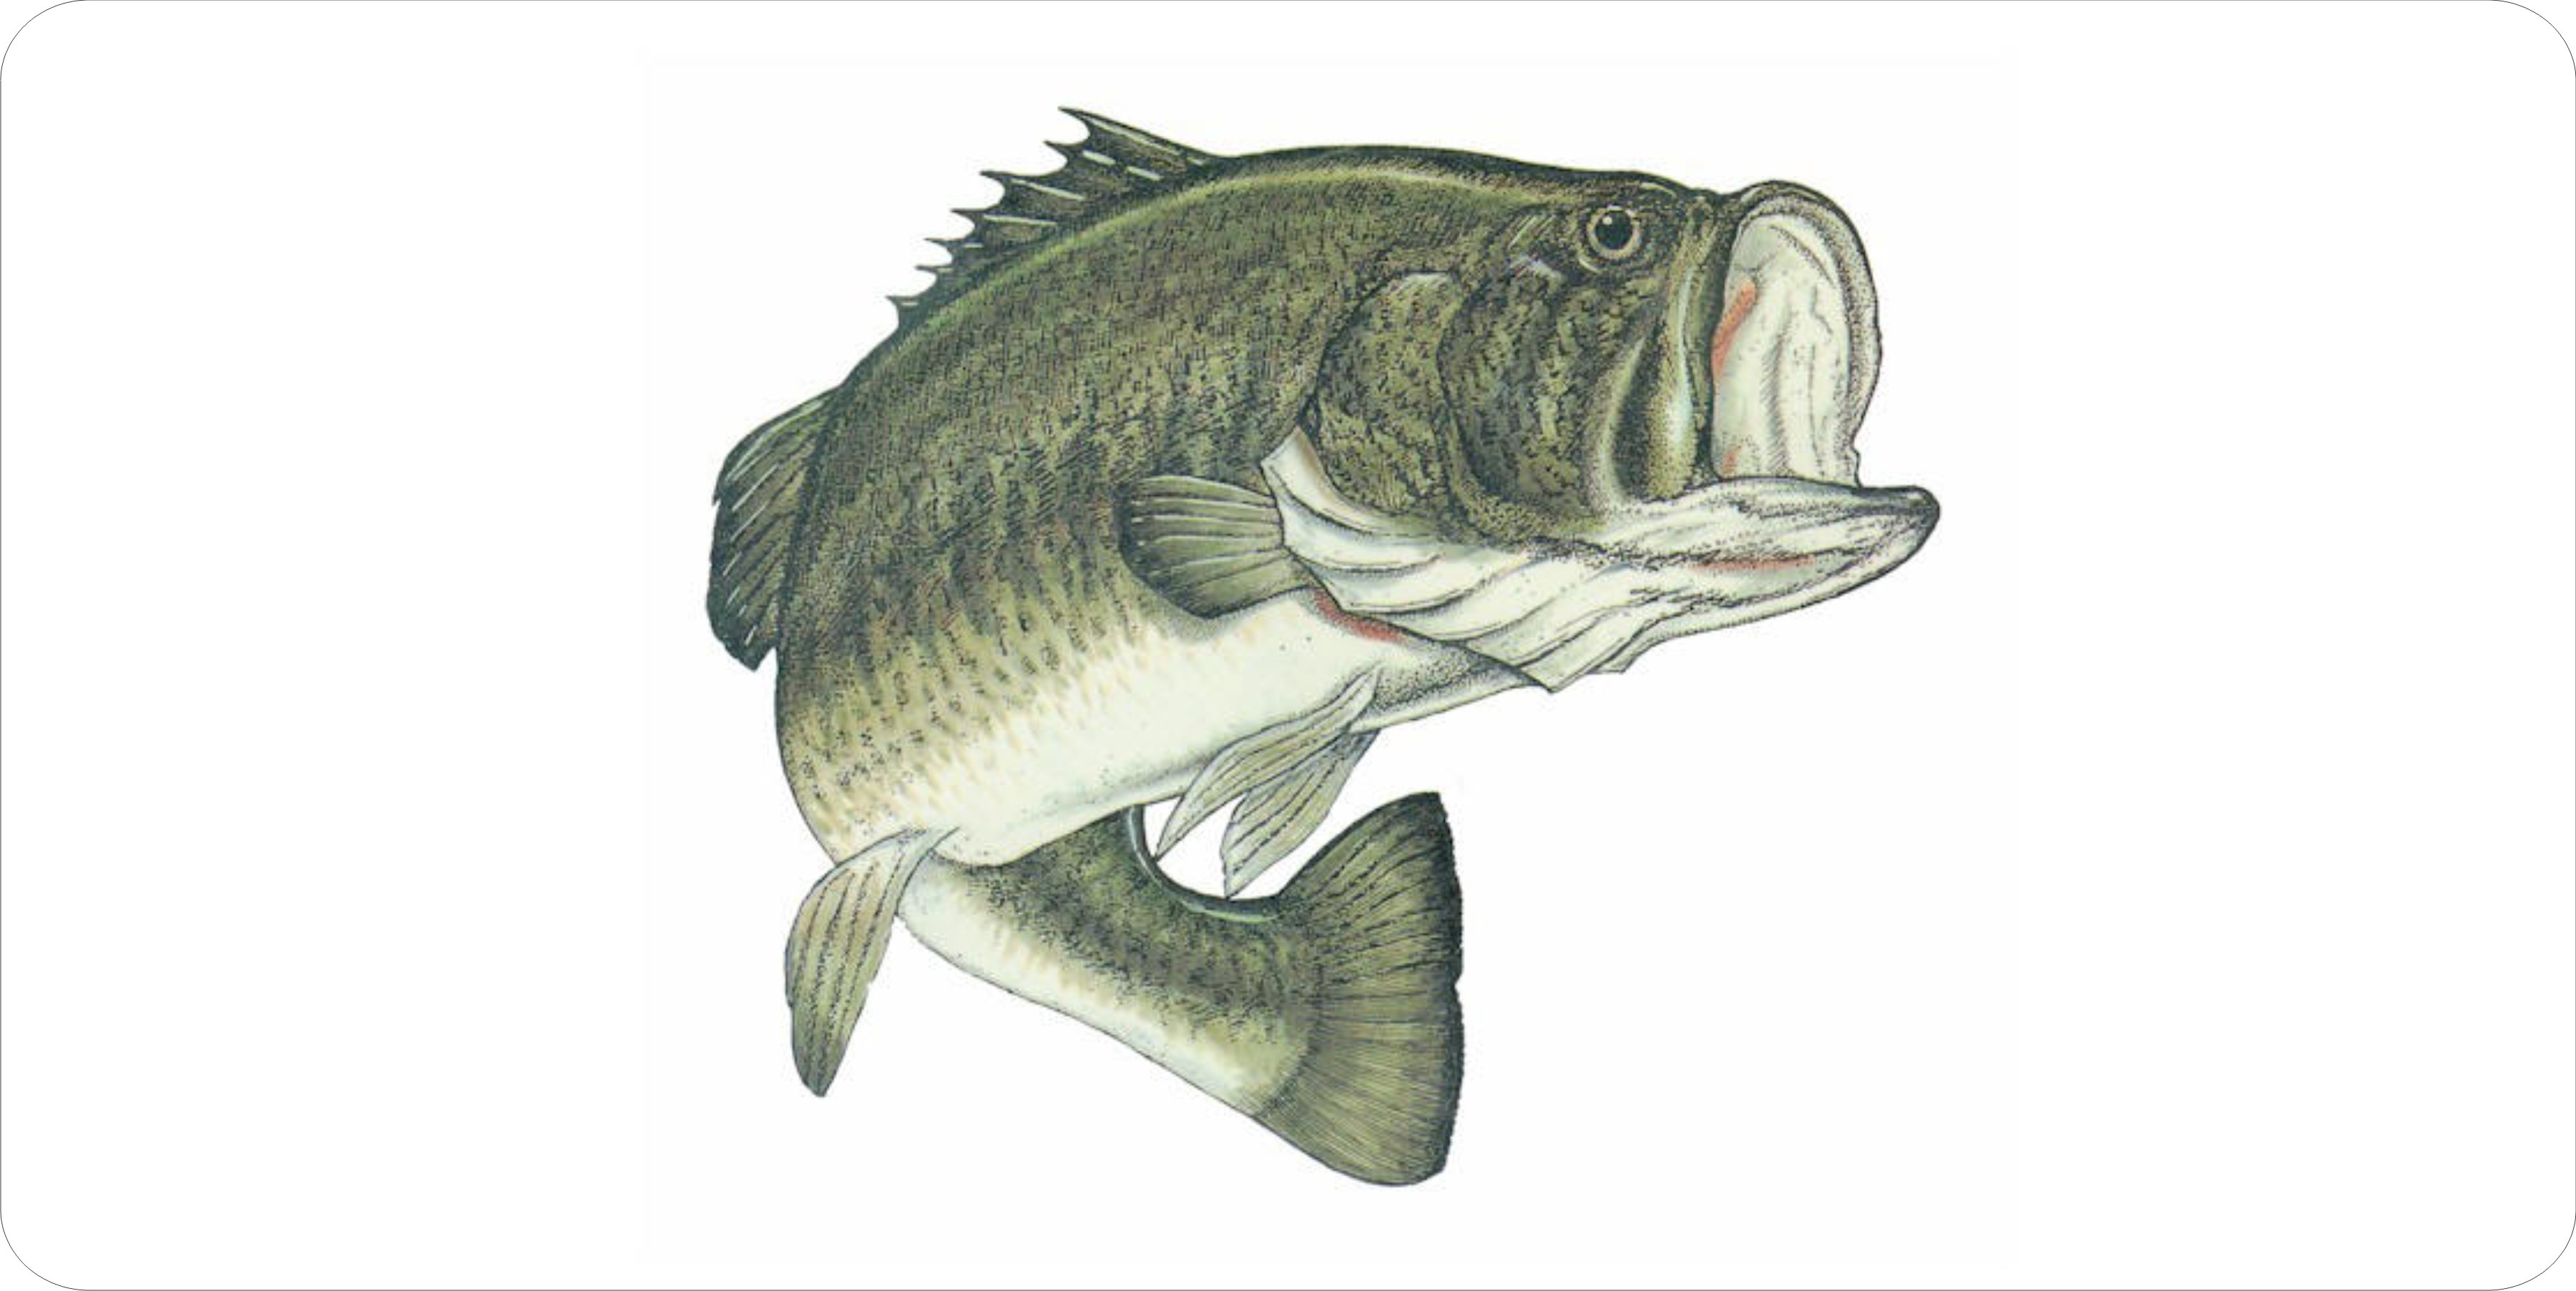 Large Mouth Bass Centered On White Plate